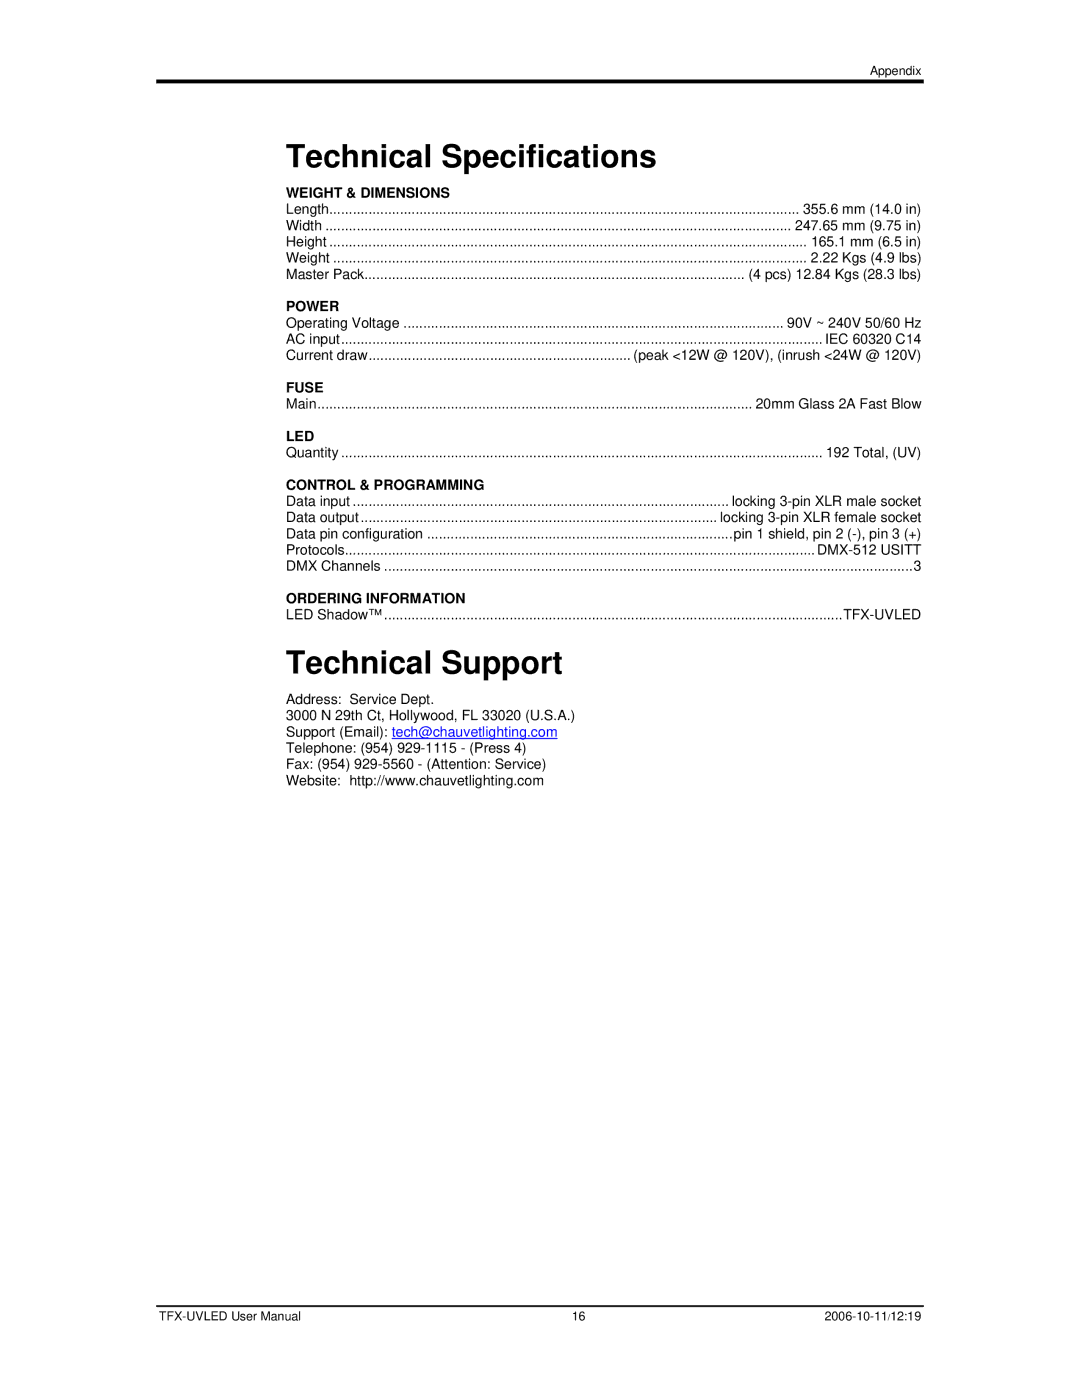 Chauvet TFX-UVLED user manual Technical Specifications, Technical Support 